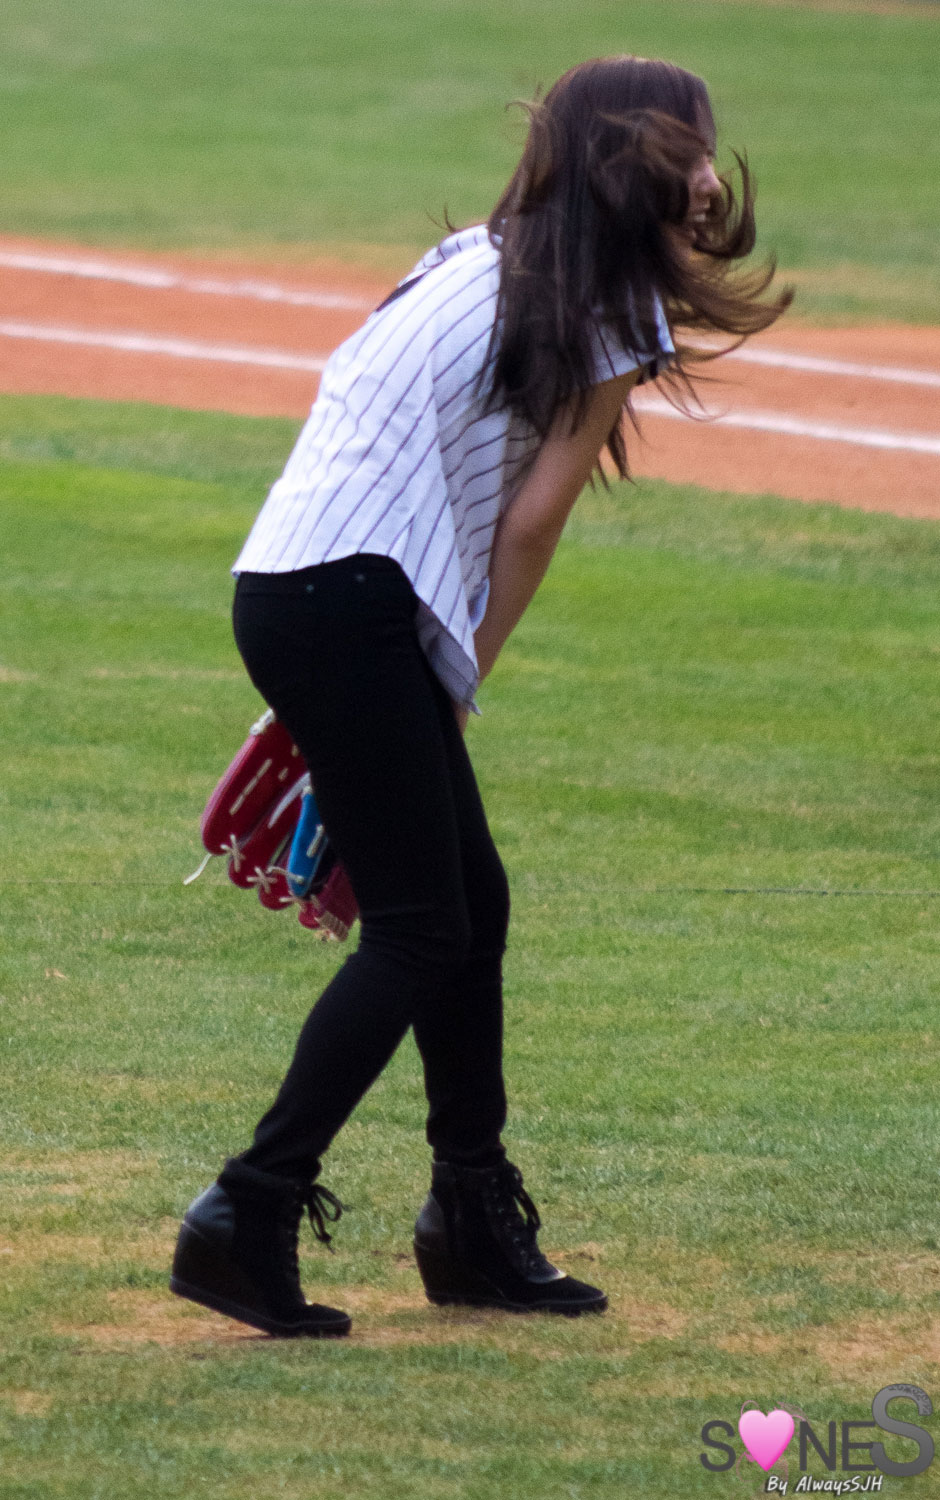 Taeyeon throws first pitch